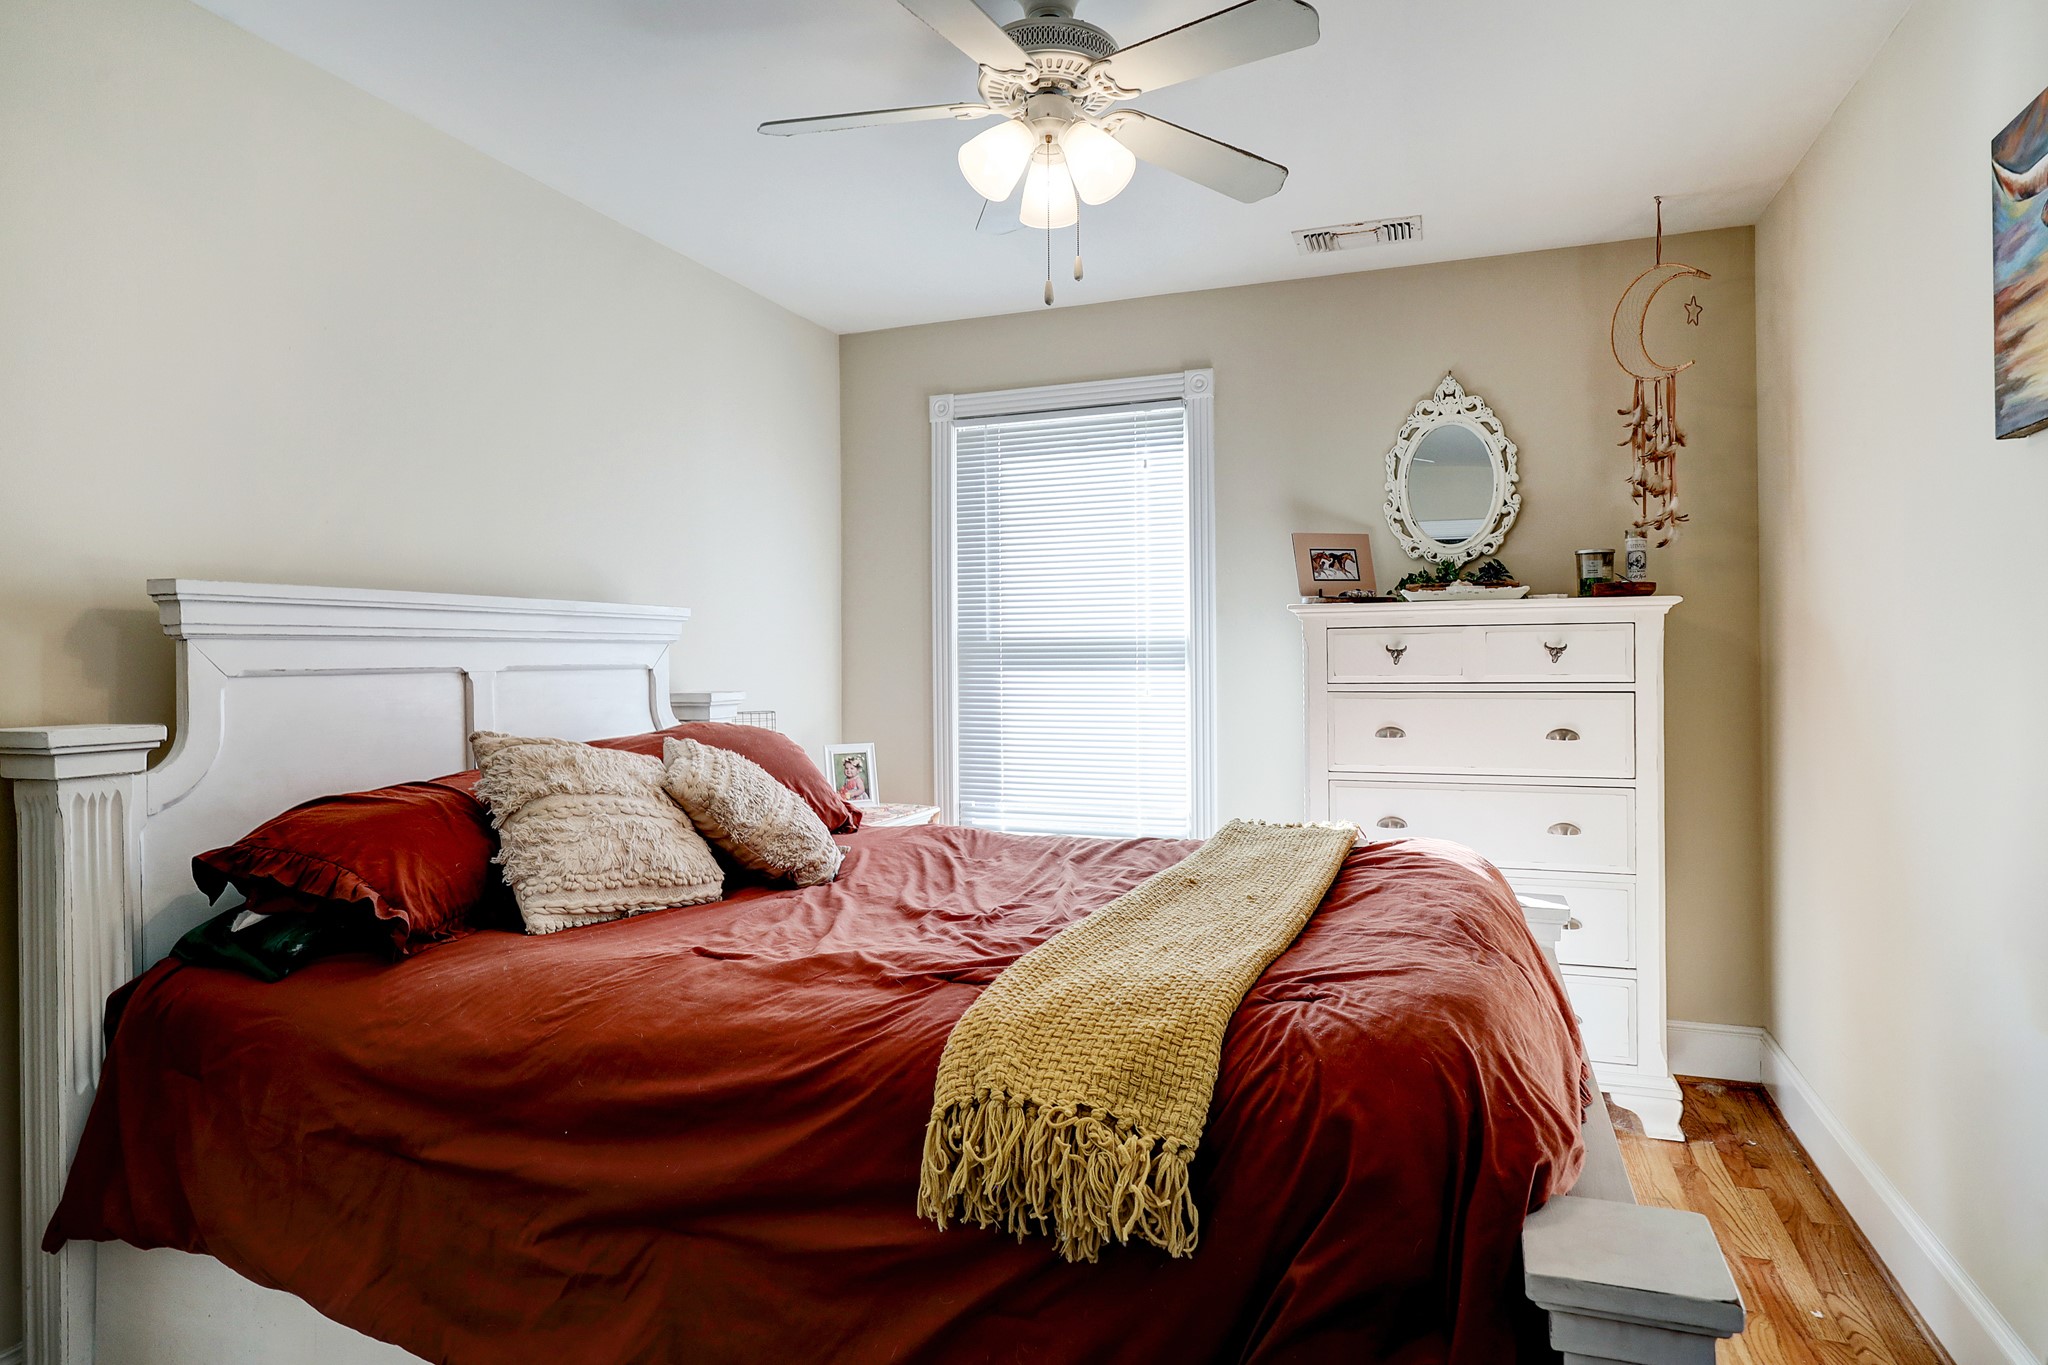 The garage apartment bedroom offers beautiful hardwood flooring, neutral colors, 6-inch baseboards, and ample closet space.